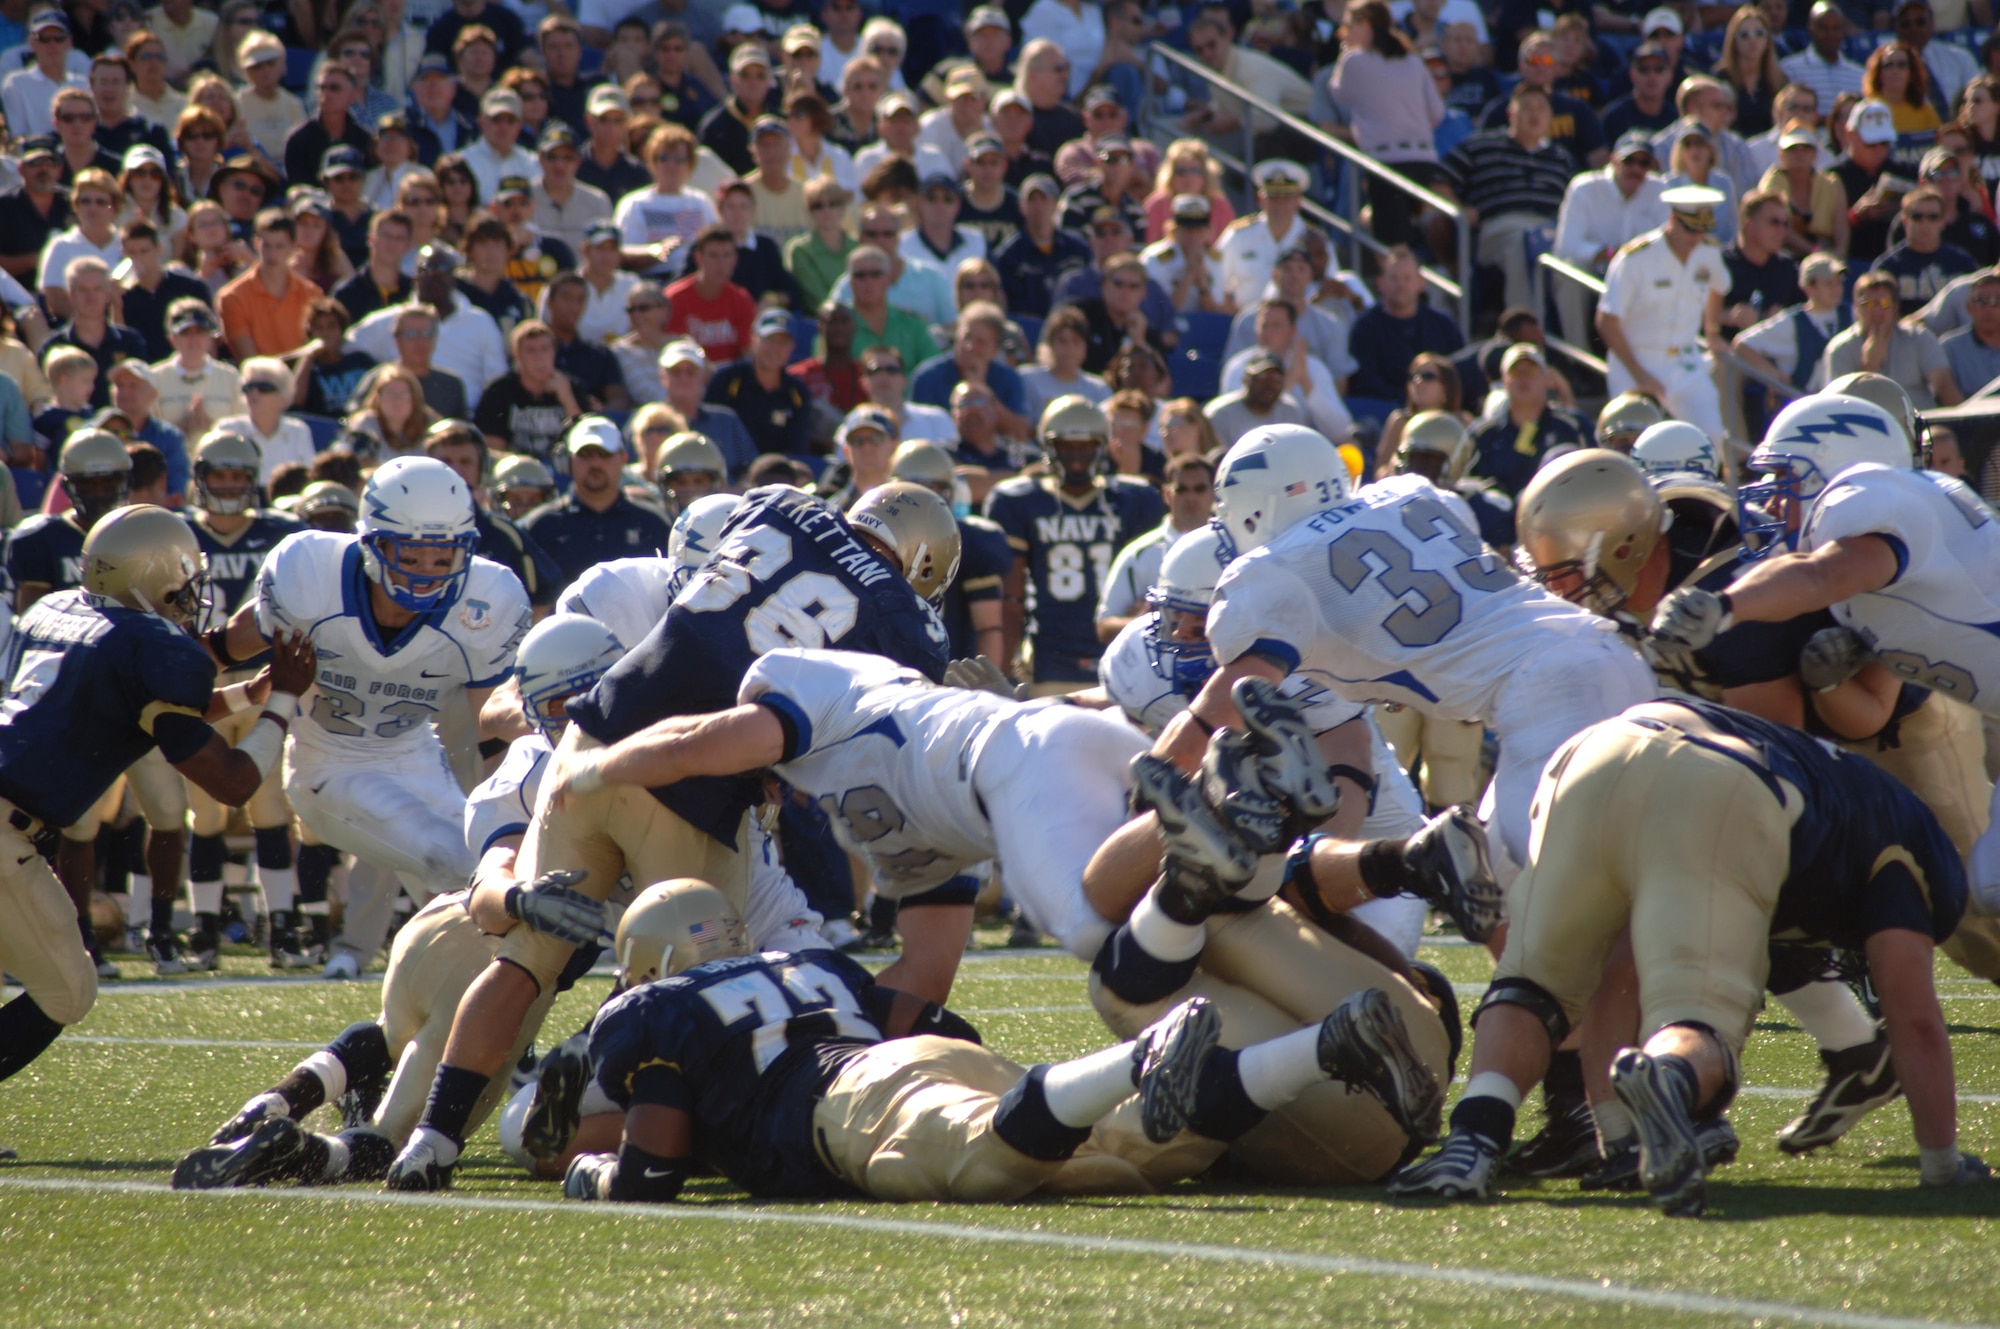 U.S. Air Force Academy Falcon noise guard Stephen Larson, 76, leads the defensive charge into Navy fullback Eric Kettani, 36, during Air Force's 31-20 loss to the Midshipmen Sept. 29 at Annapolis, Md. Larson had a career high seven tackles and a sack in the game. (U.S. Air Force photo/Capt. Jillian Torango) 

